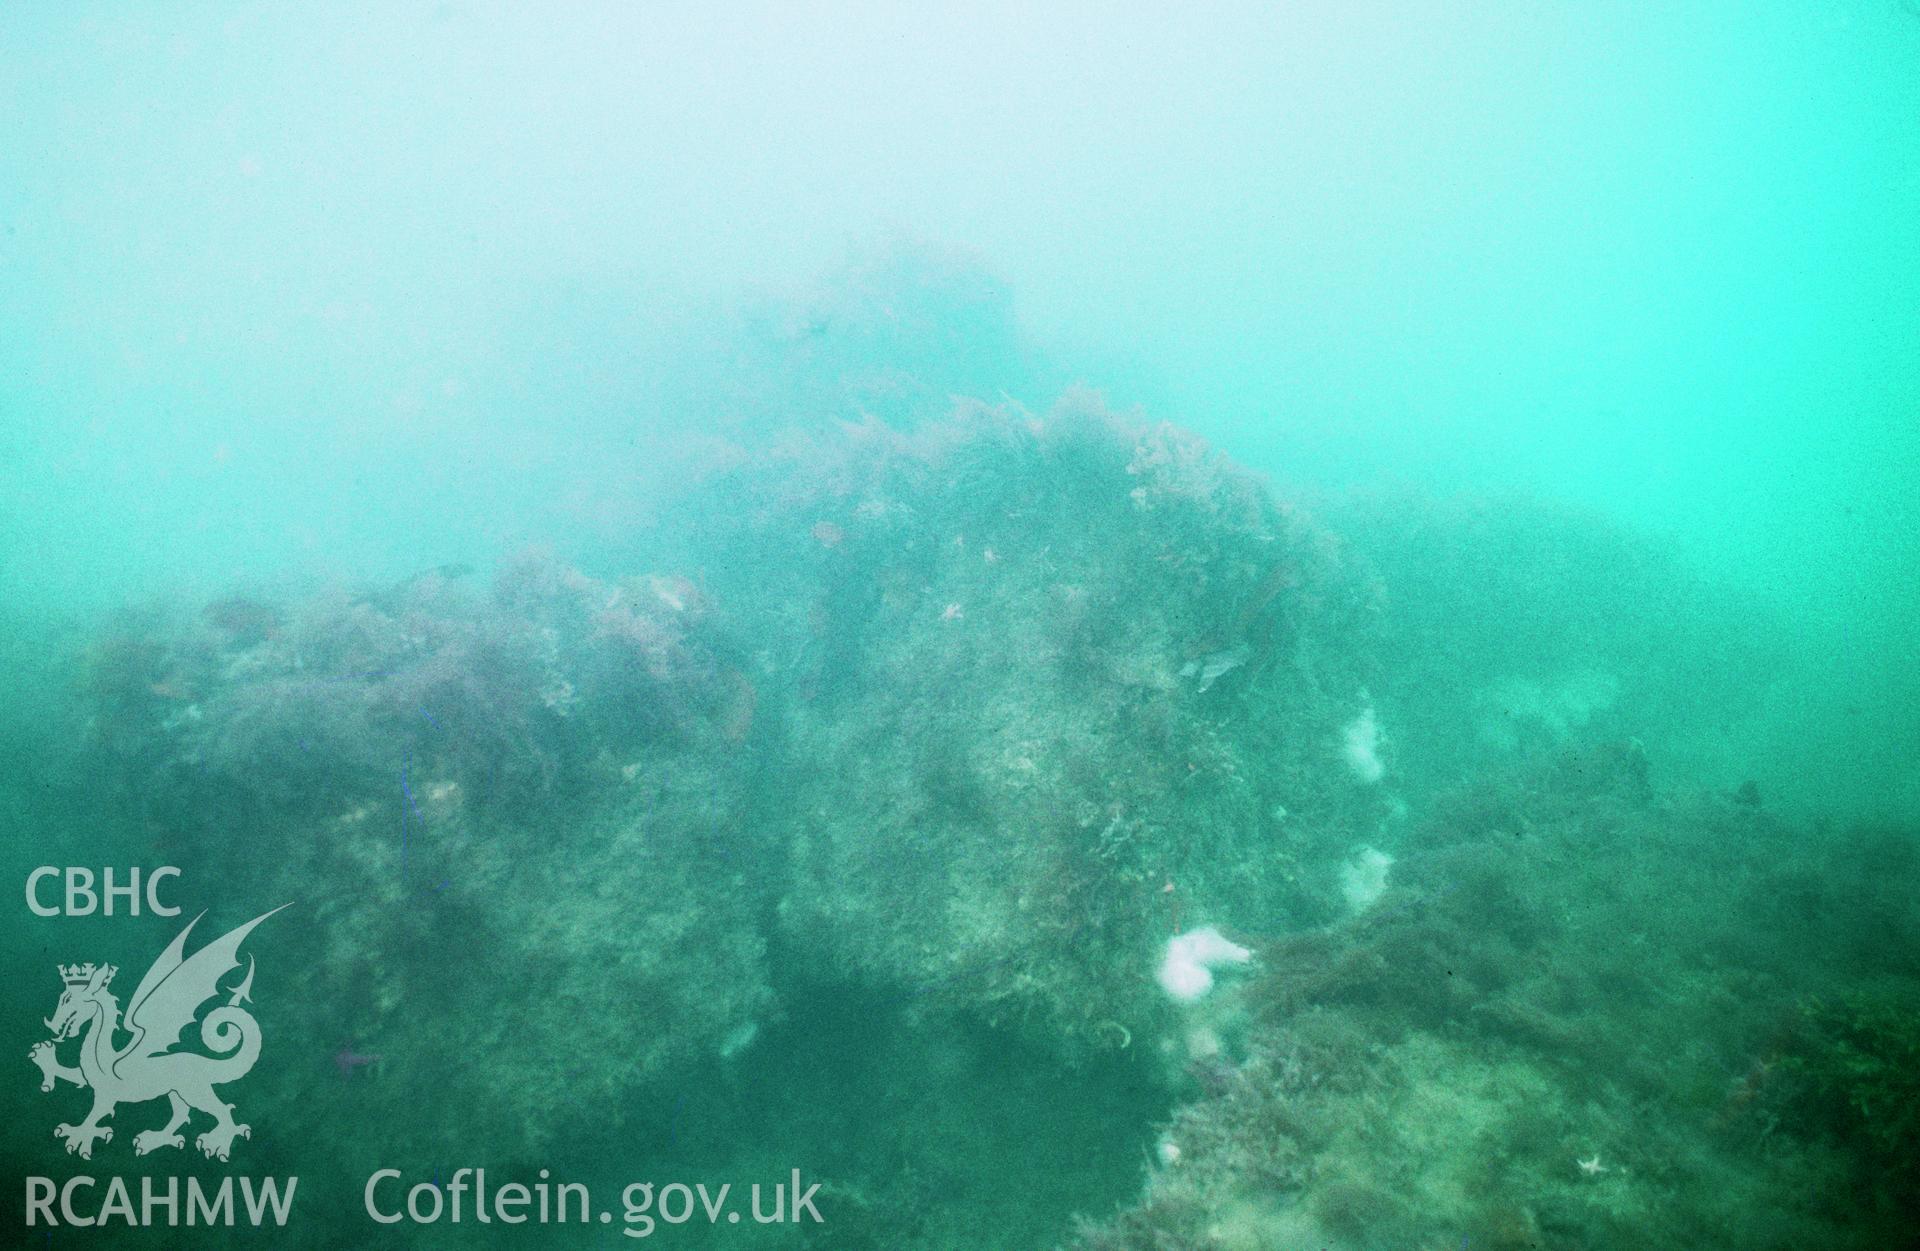 View showing some of the cargo of Carrera marble blocks, one of a set of 41 colour slides from an underwater survey of the Tal-y-Bont designated shipwreck, carried out by the Archaeological Diving Unit.